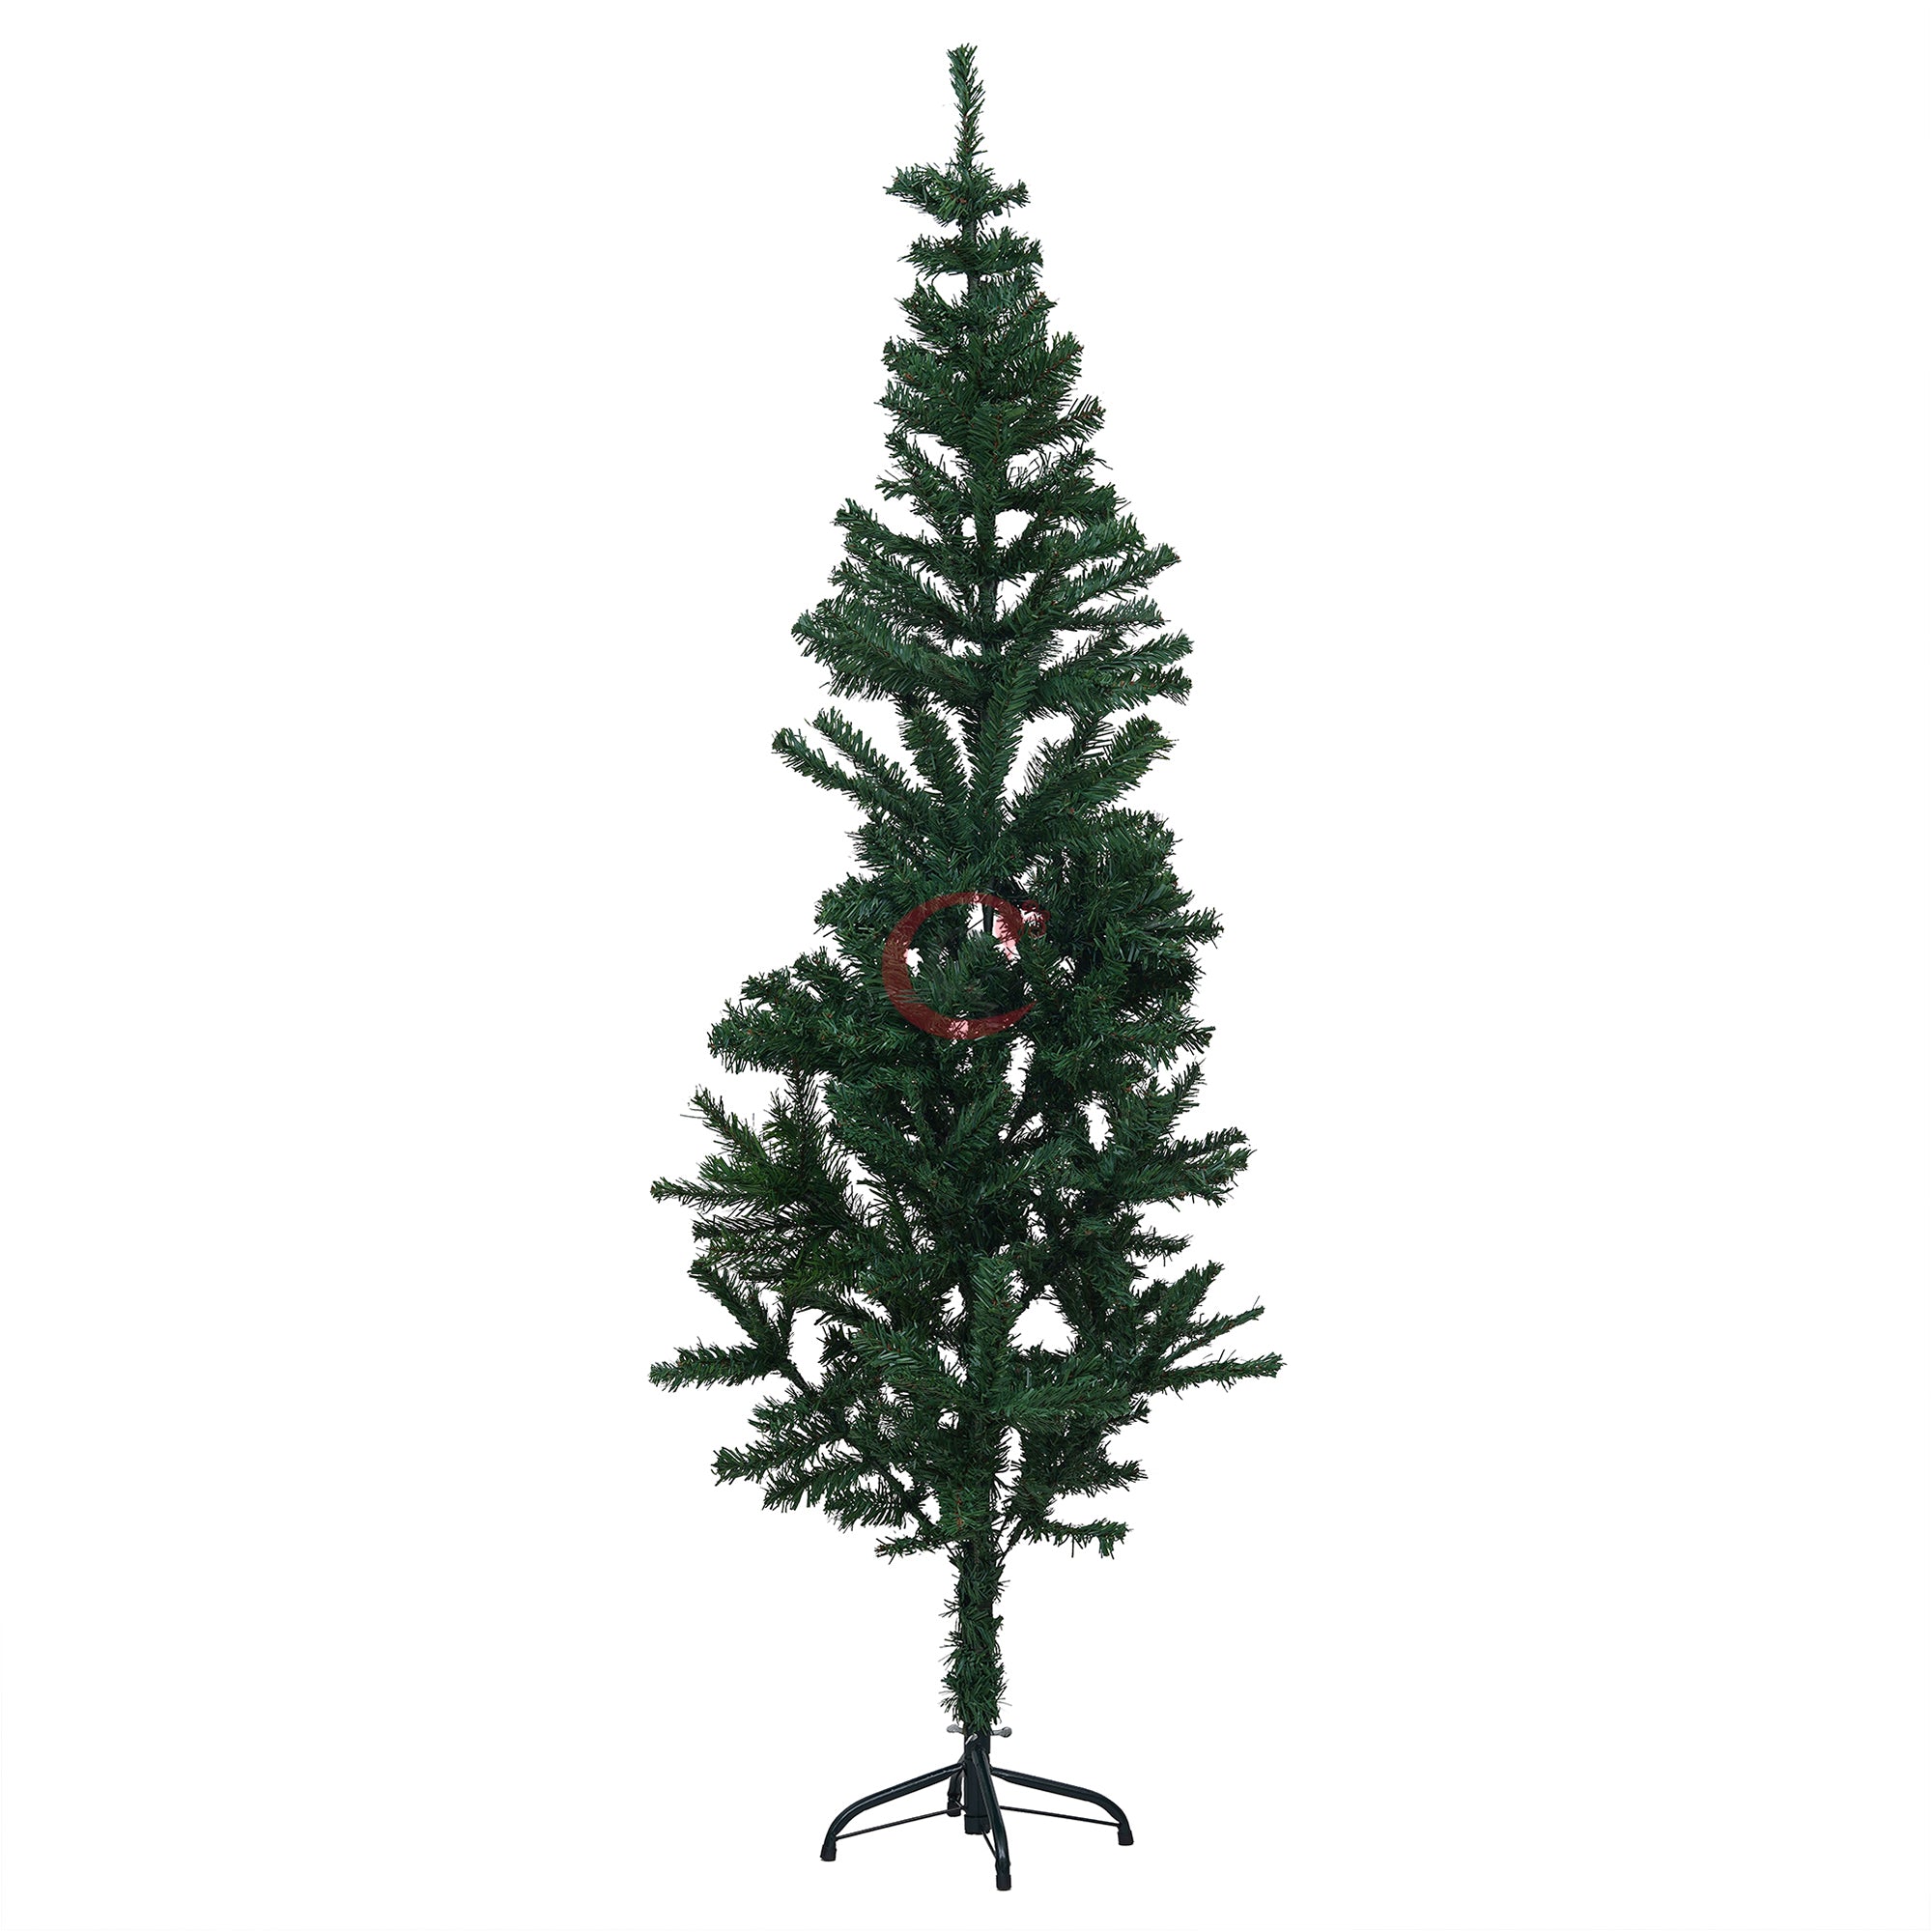 eCraftIndia 5 Feet Green Artificial Christmas Tree Xmas Pine Tree with Metal Stand - Xmas Tree for Indoor, Outdoor, Home, Living Room, Office, Church Decor - Merry Christmas Decoration Item 2